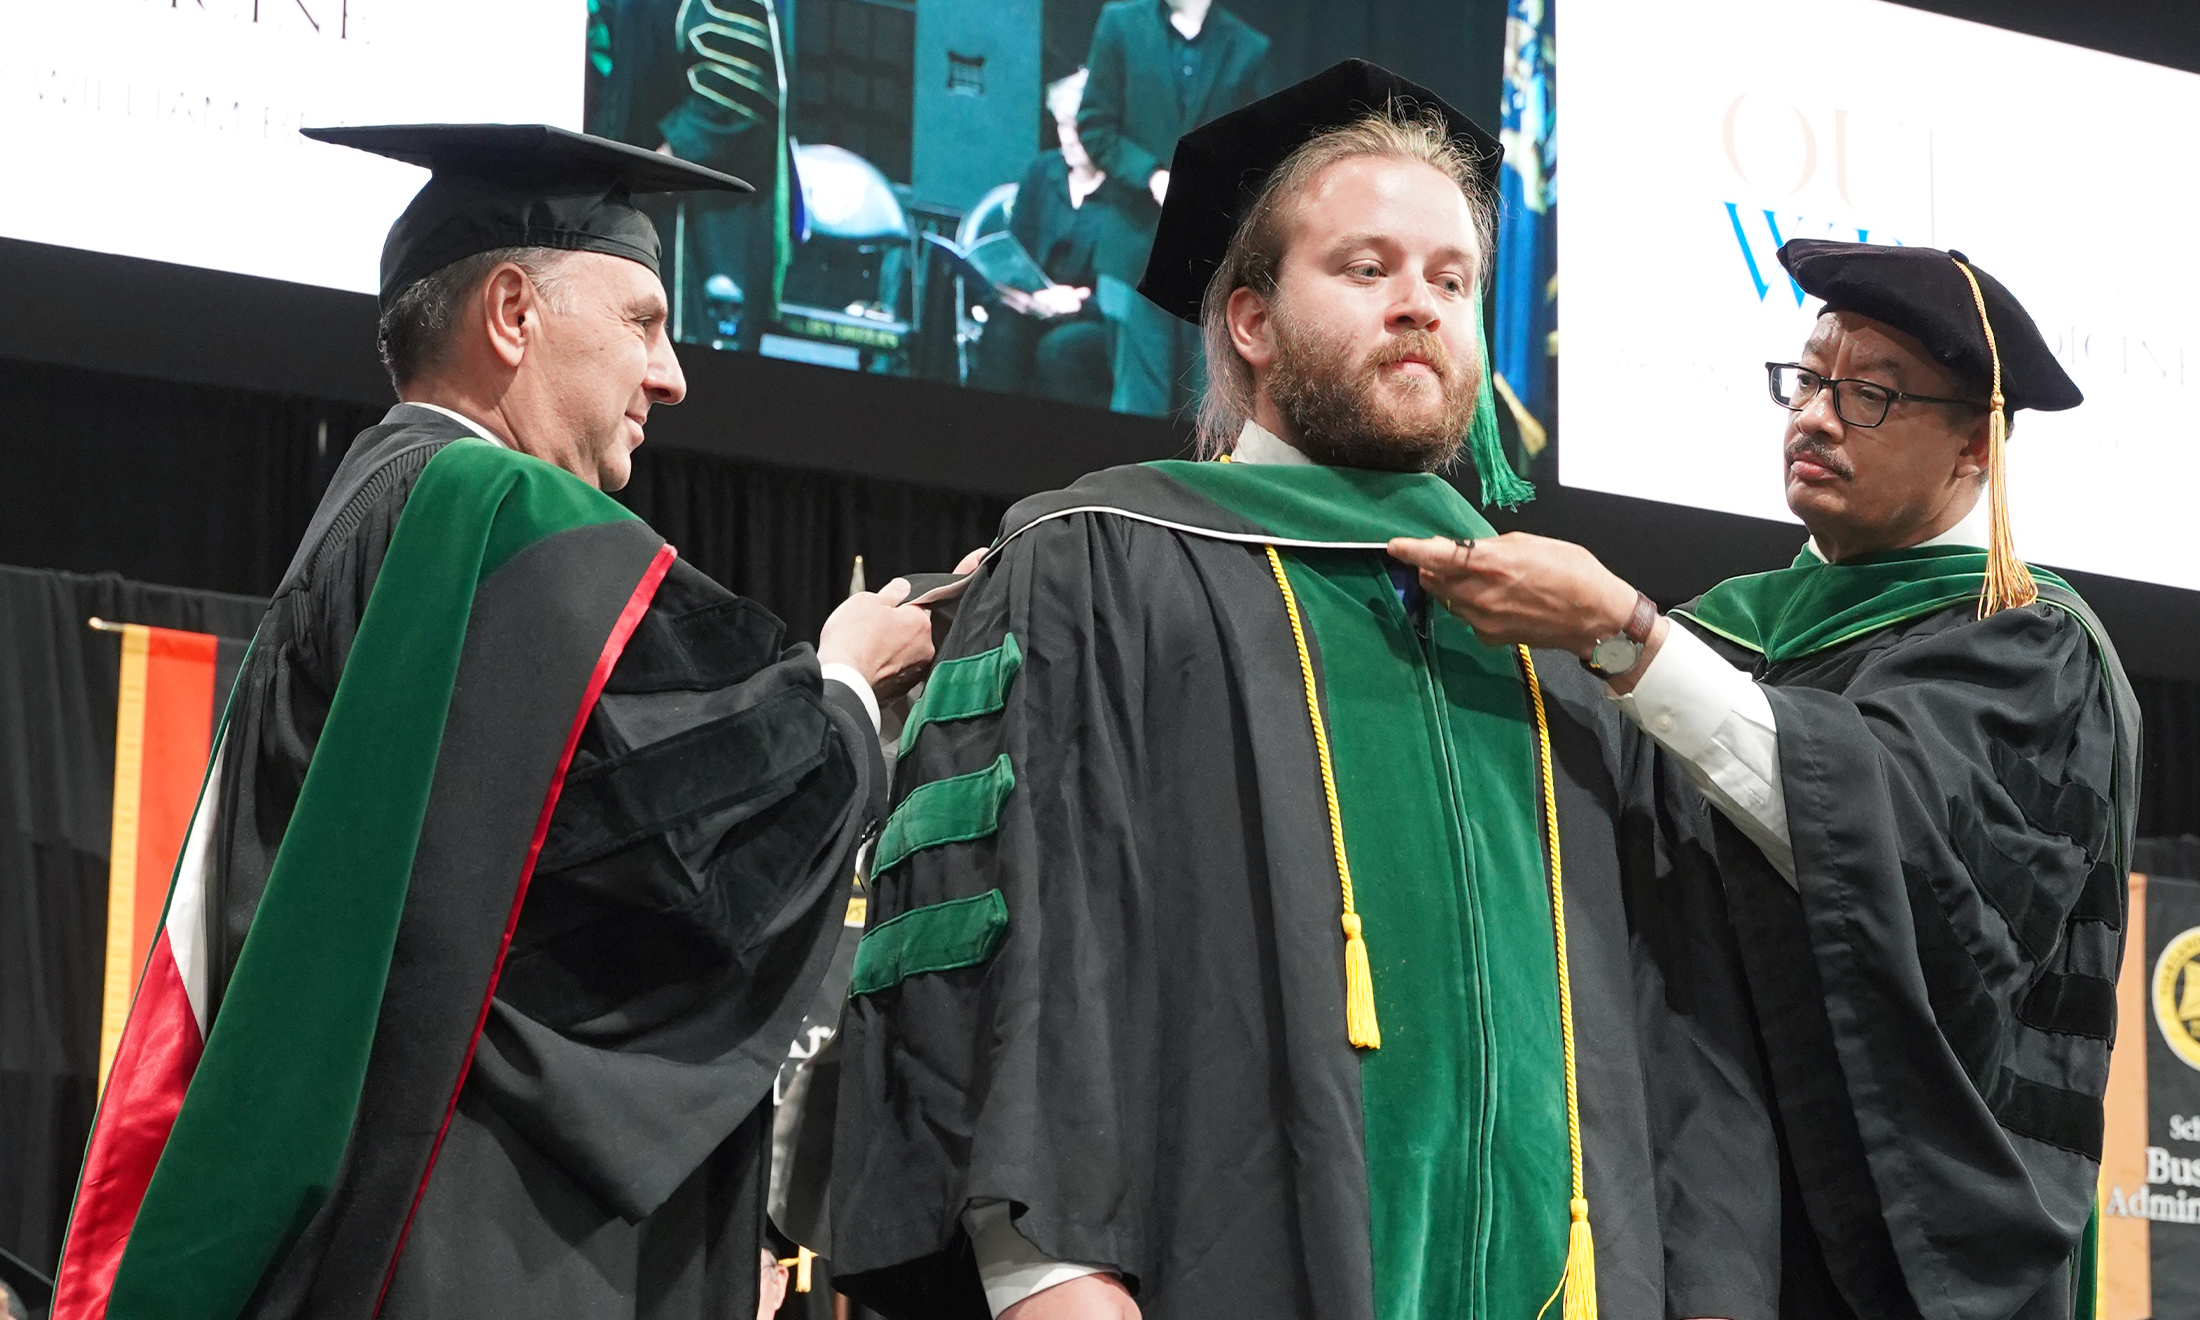 An image of James Blumline being hooded at commencement